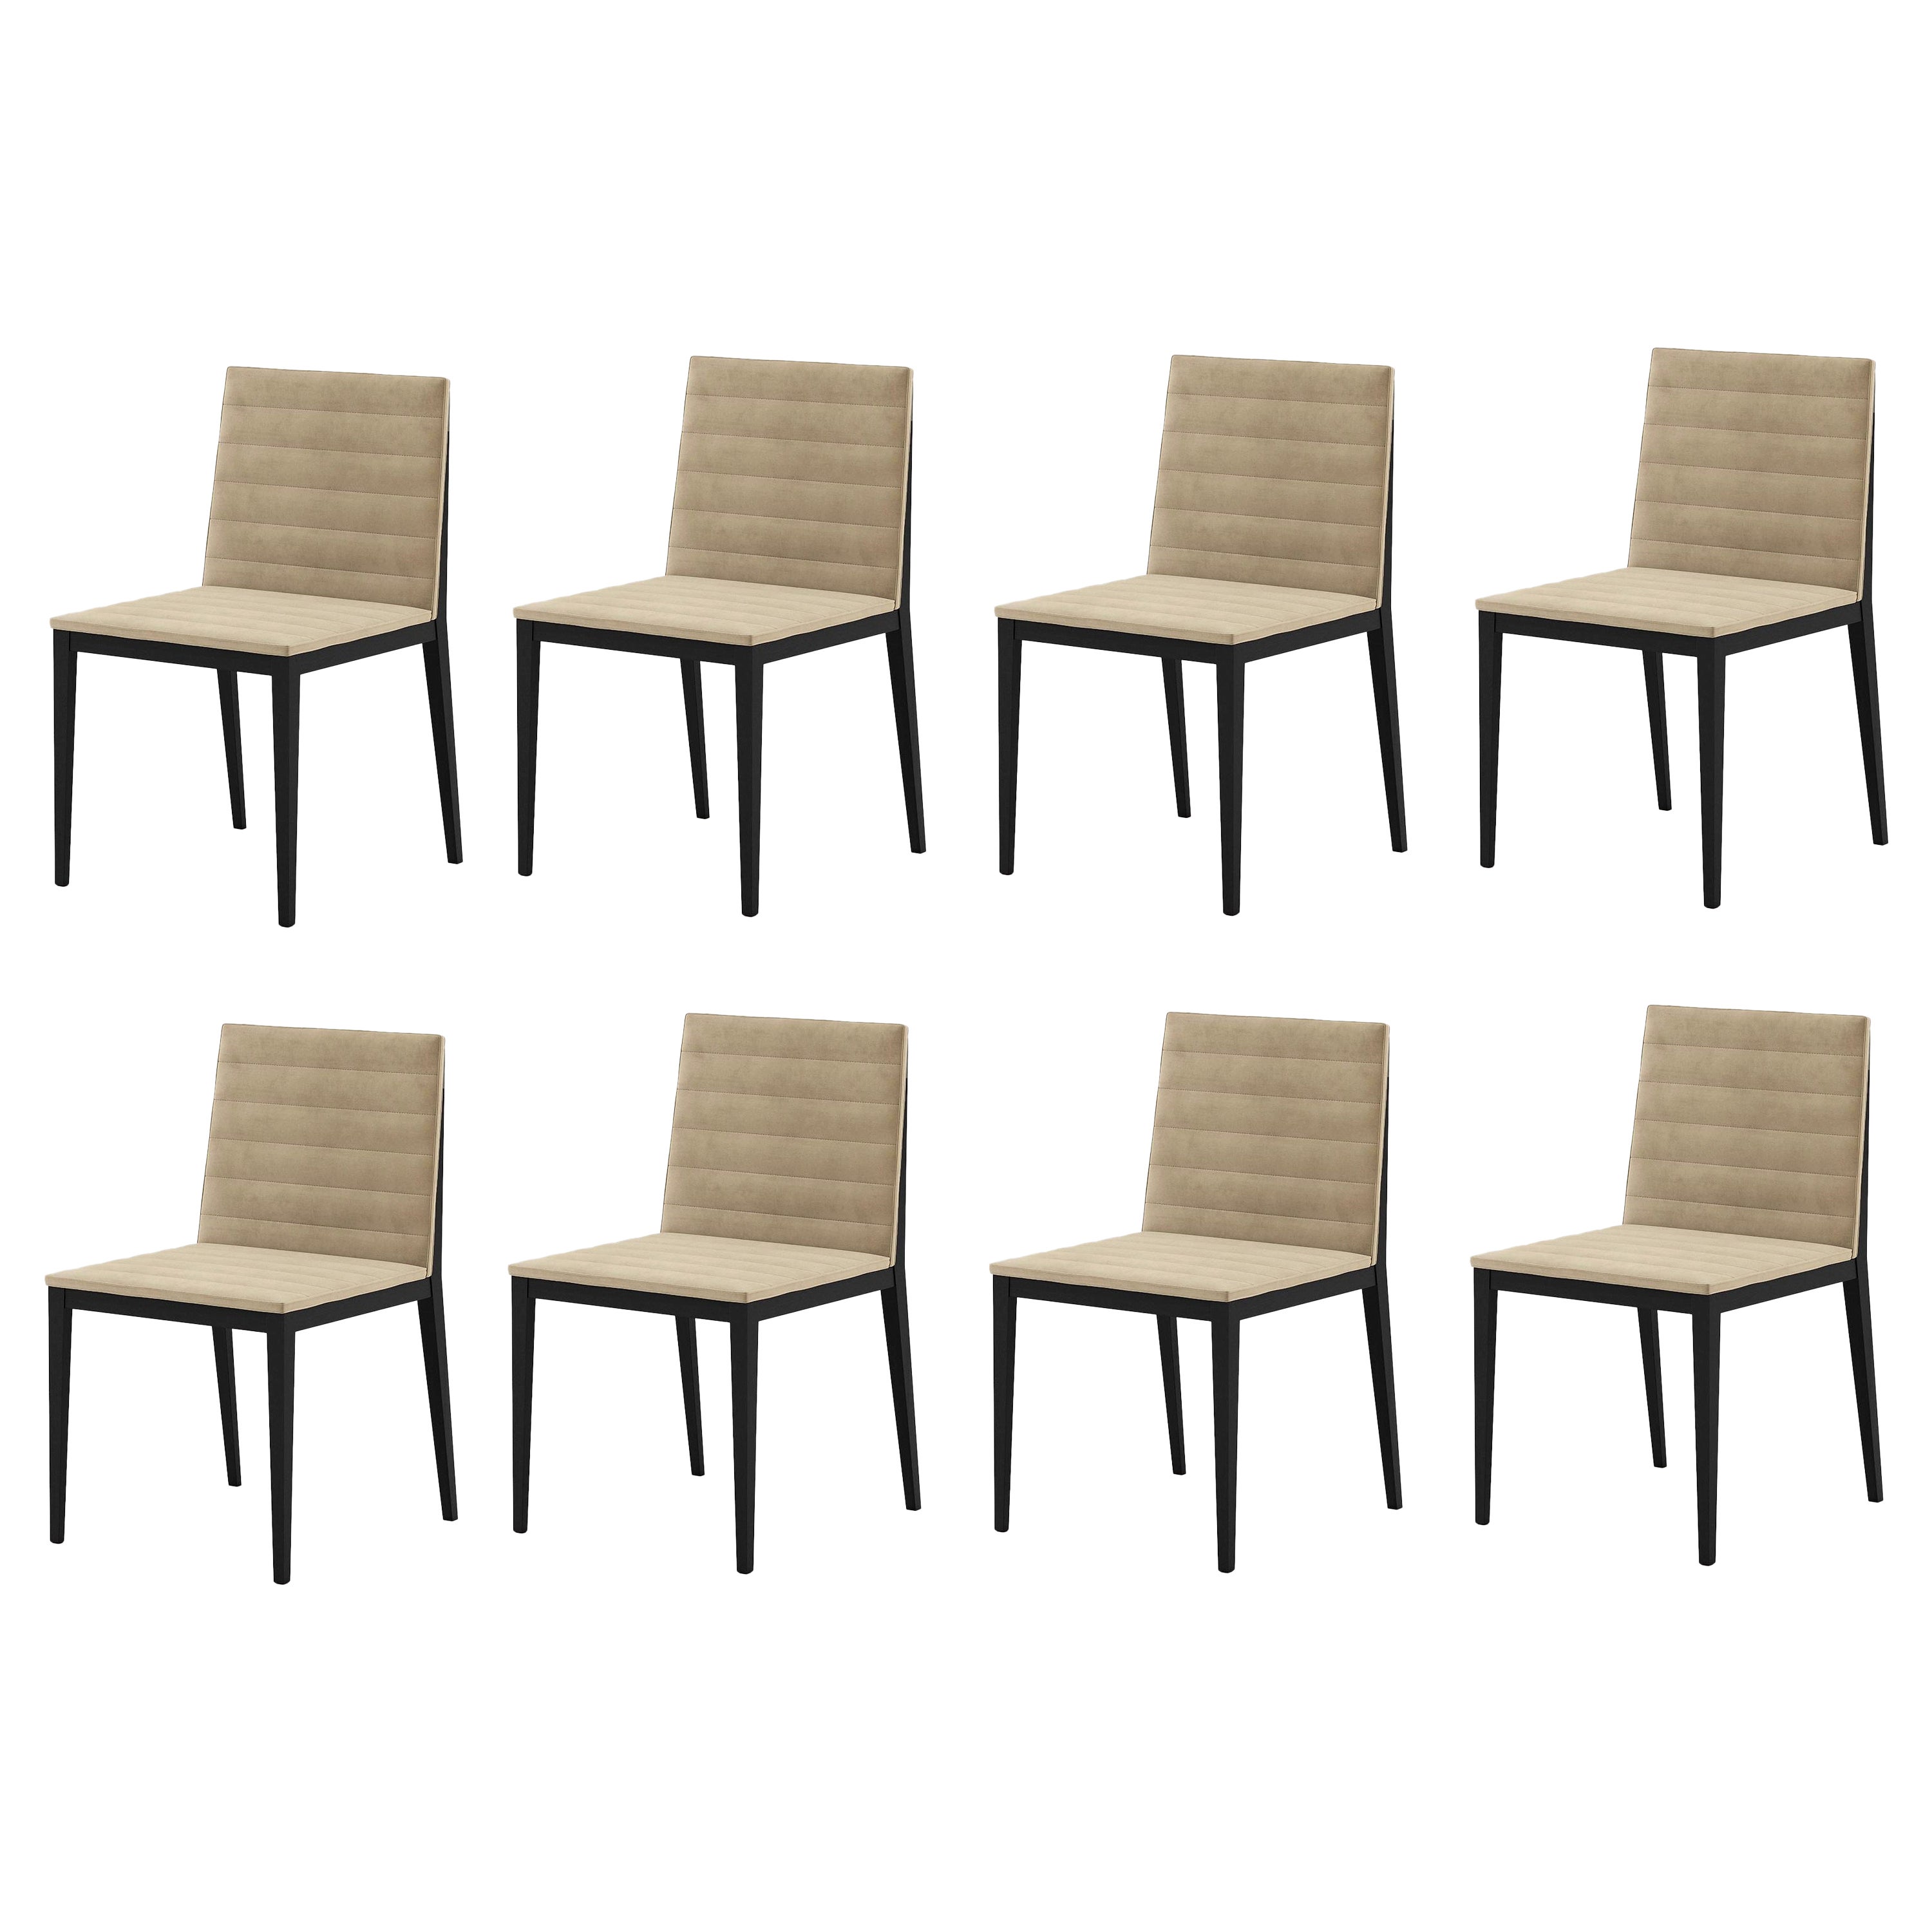 8 Dining Chairs, Horizontal Stitching/Fumed Legs